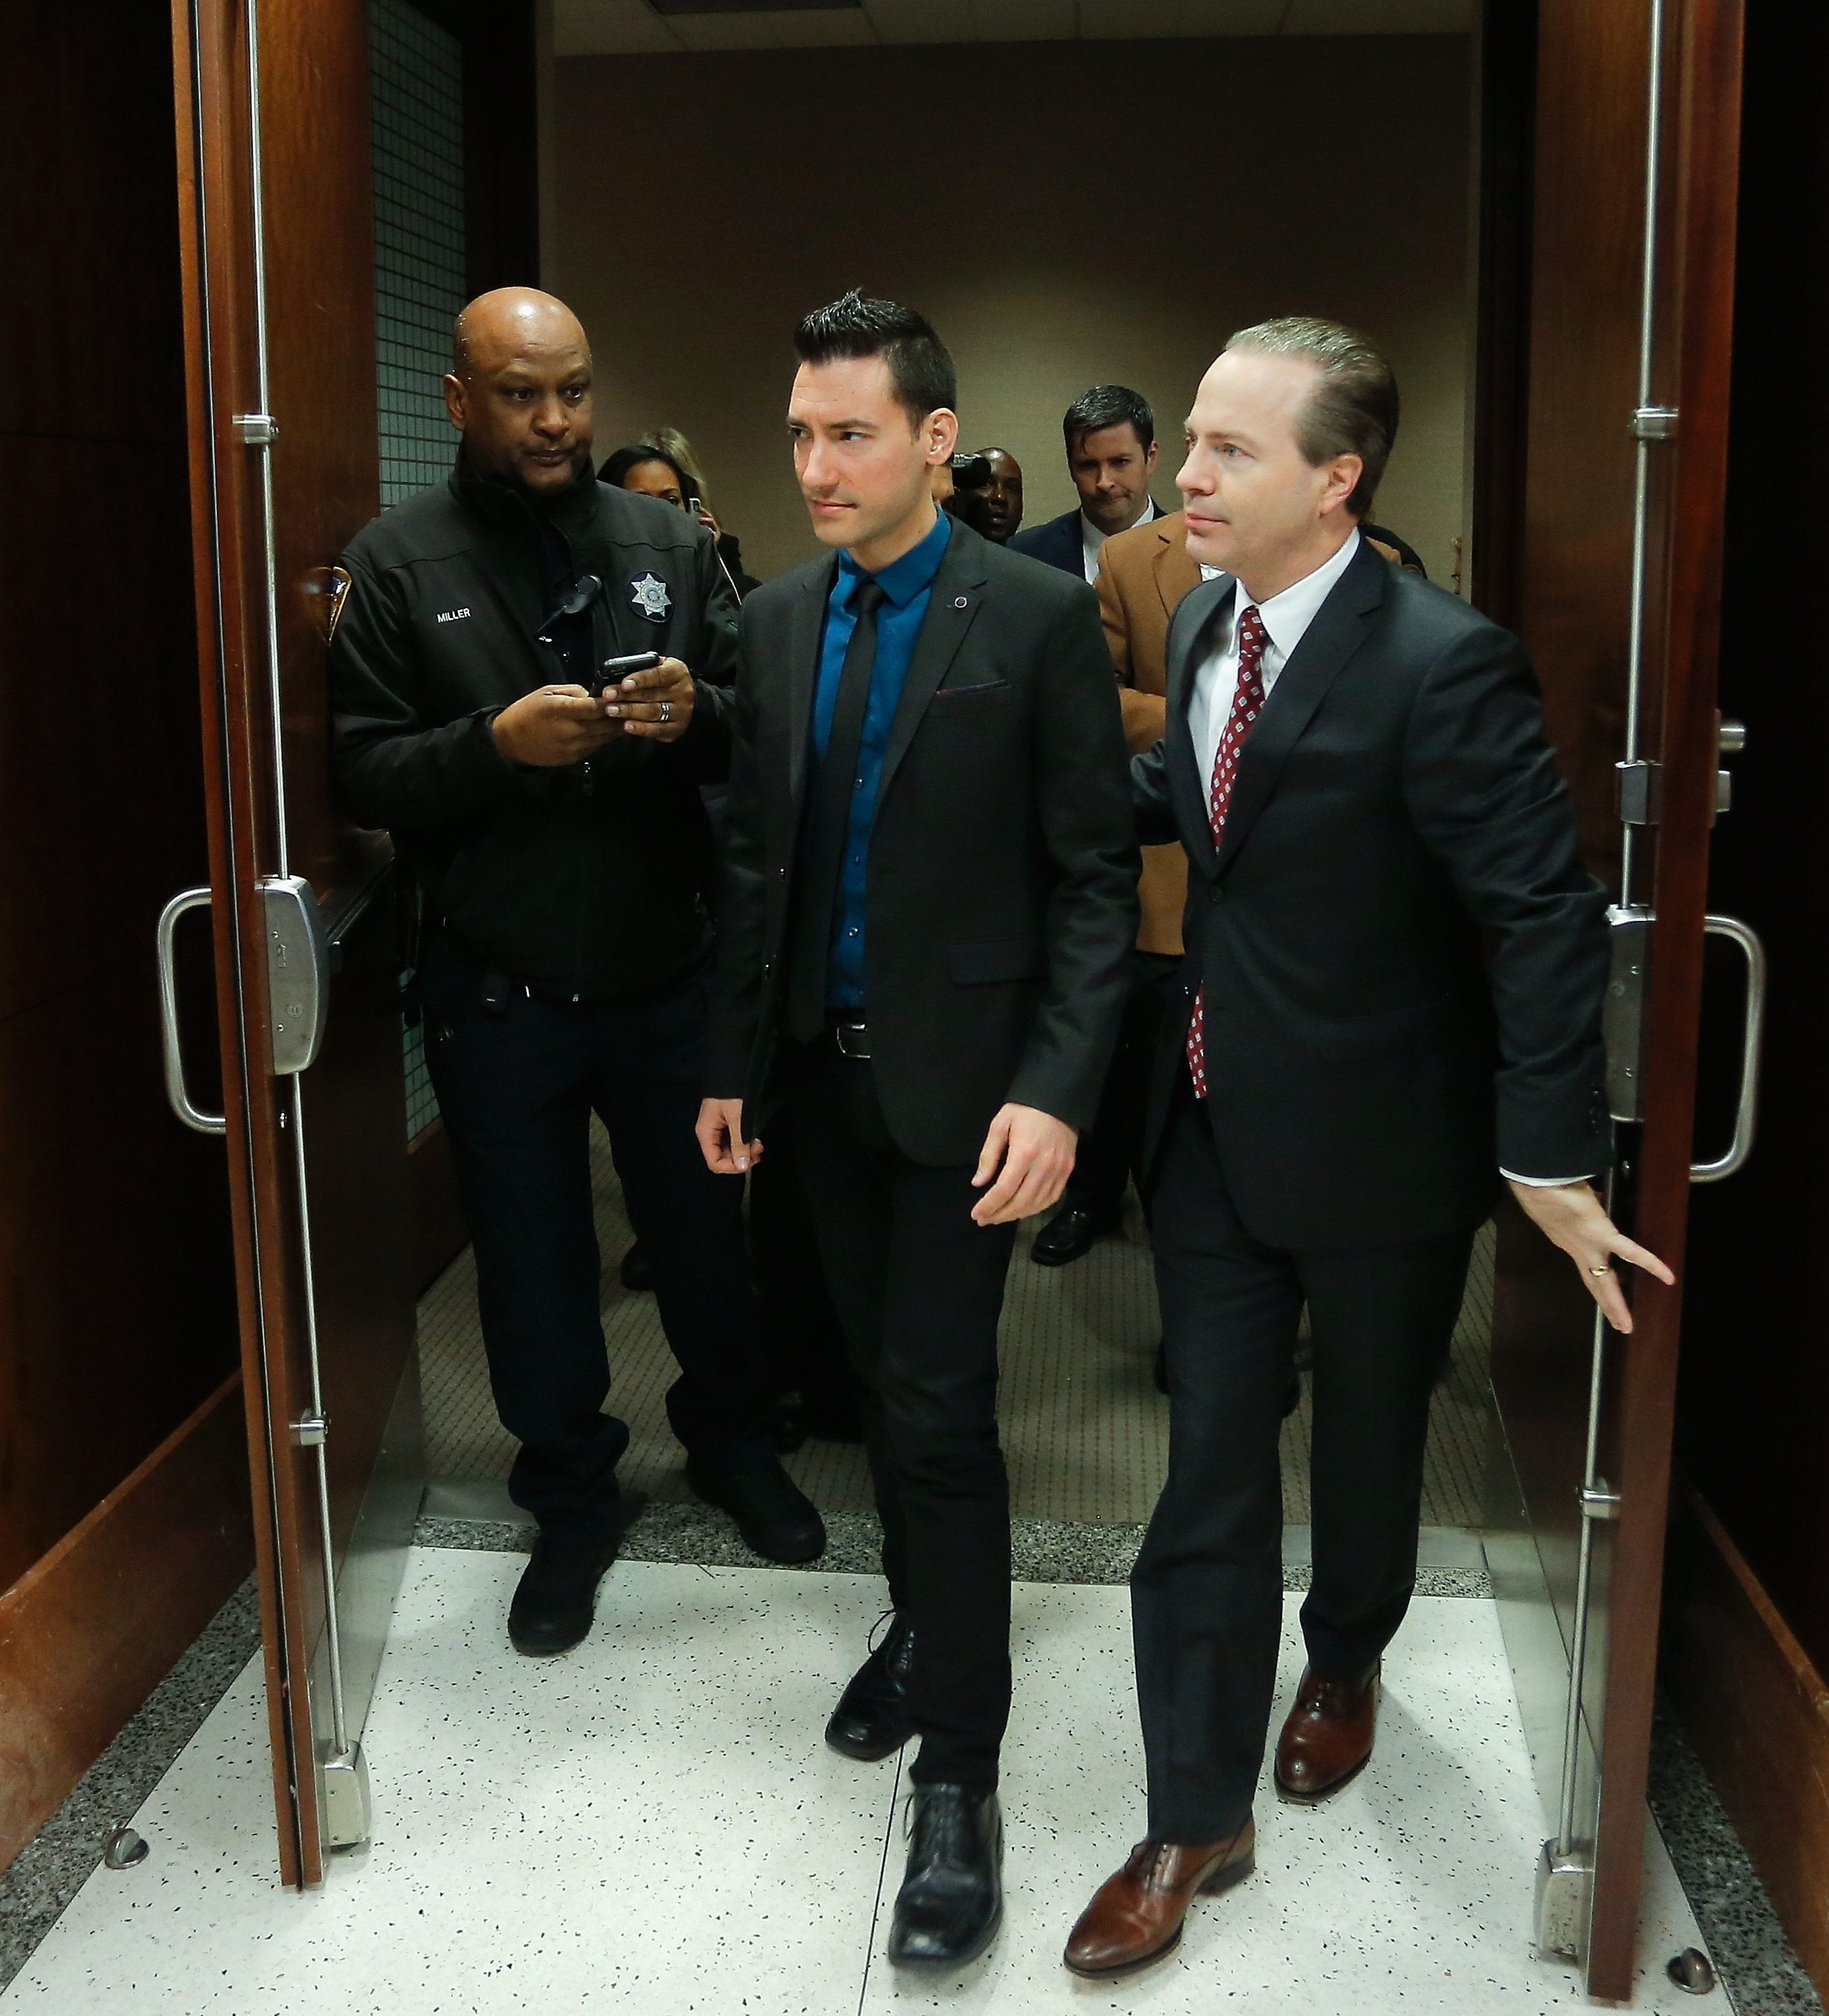 David Daleiden, left, one of the two anti-abortion activists indicted last week, leaves the courtroom with attorney Jared Woodfill after turning himself in to authorities Thursday in Houston. Daleiden and Sandra Merritt are charged with tampering with a governmental record, a felony punishable by up to 20 years in prison.